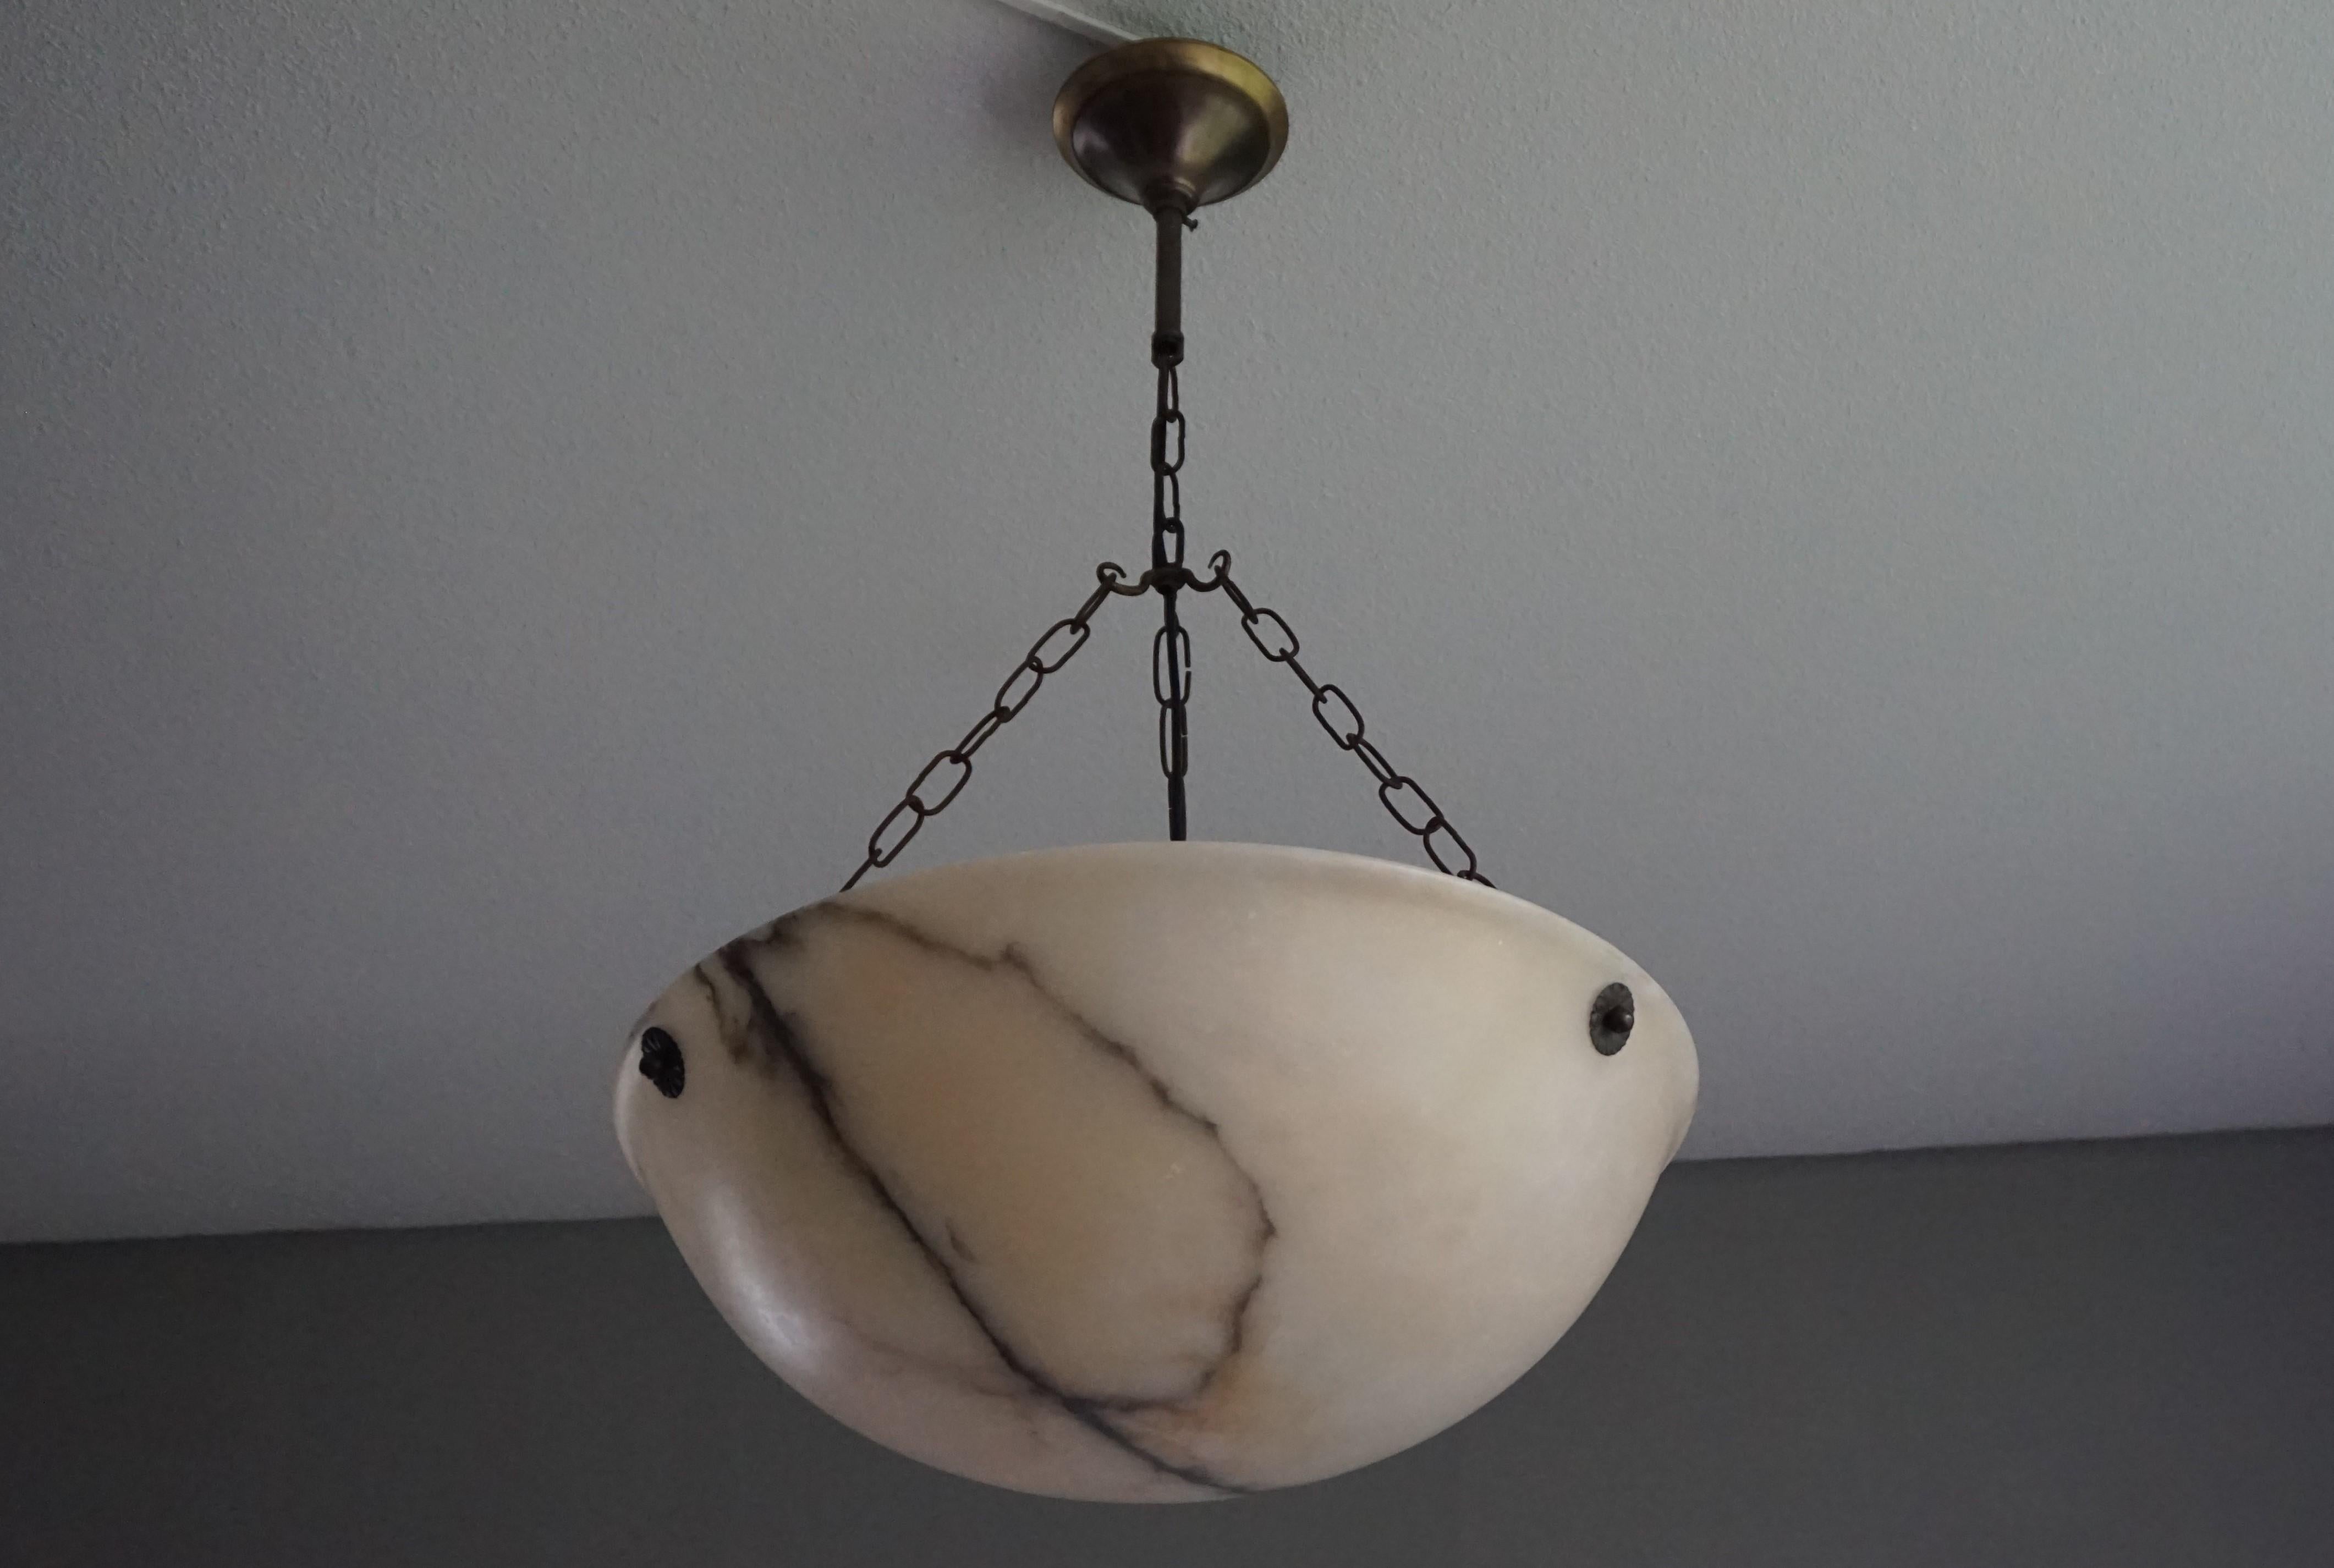 Antique and striking alabaster pendant.

This antique alabaster chandelier is of great quality and condition. The striking alabaster dish/bowl with its large diameter and unusual height has a lightning-like black vein running through the middle.